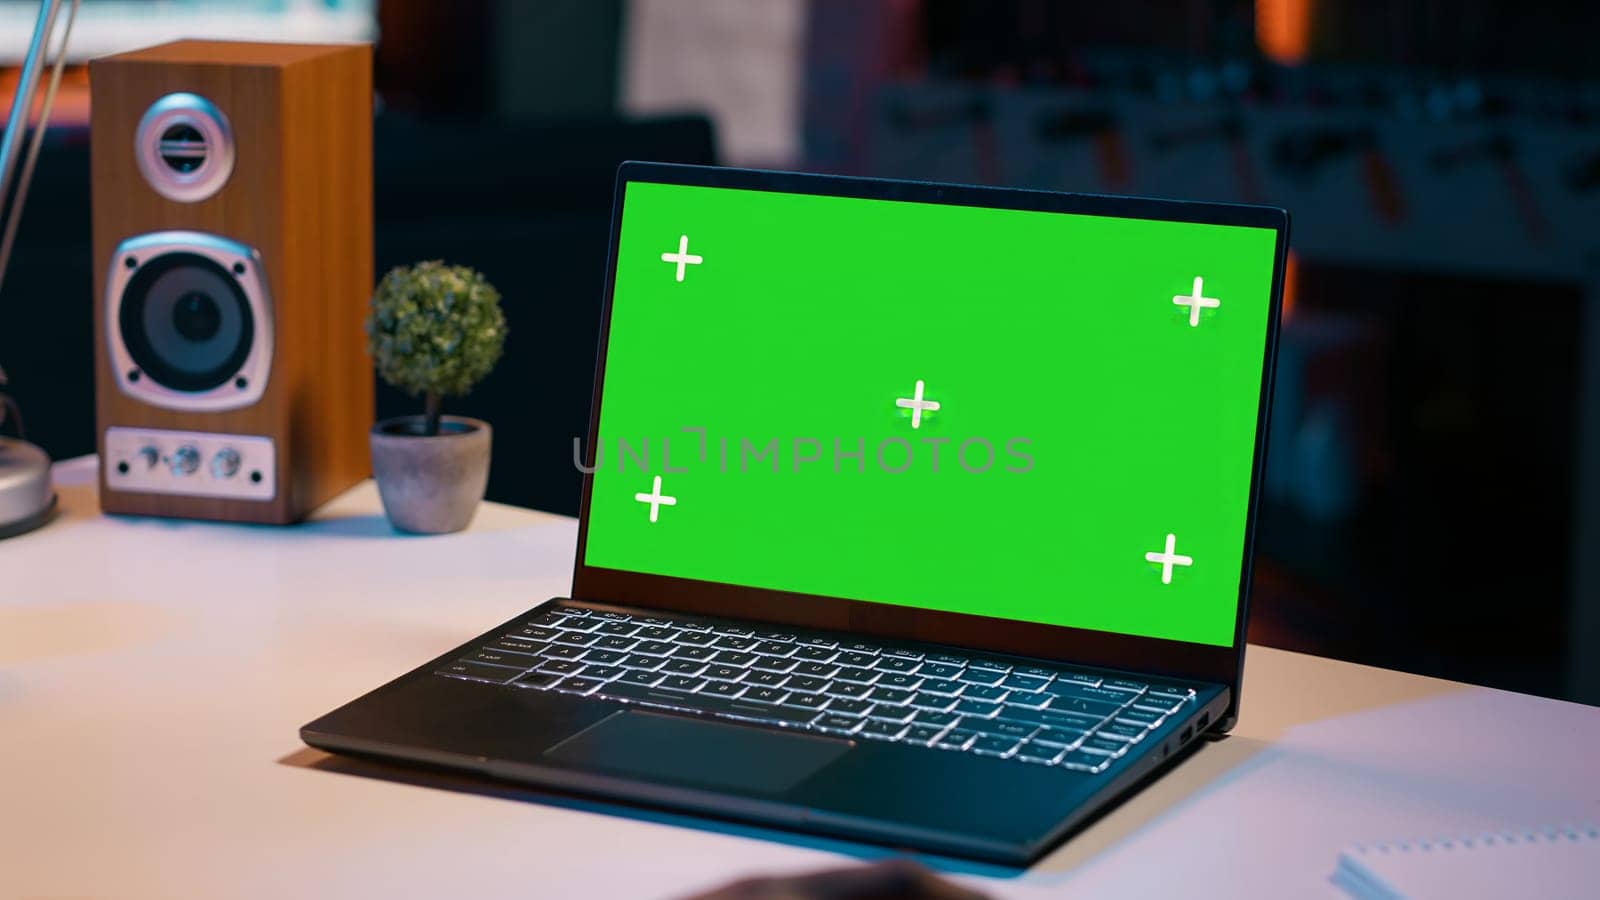 University student checks greenscreen display on laptop at home, improving her education and using isolated chromakey layout on wireless device. Girl looks at mockup screen. Camera A.